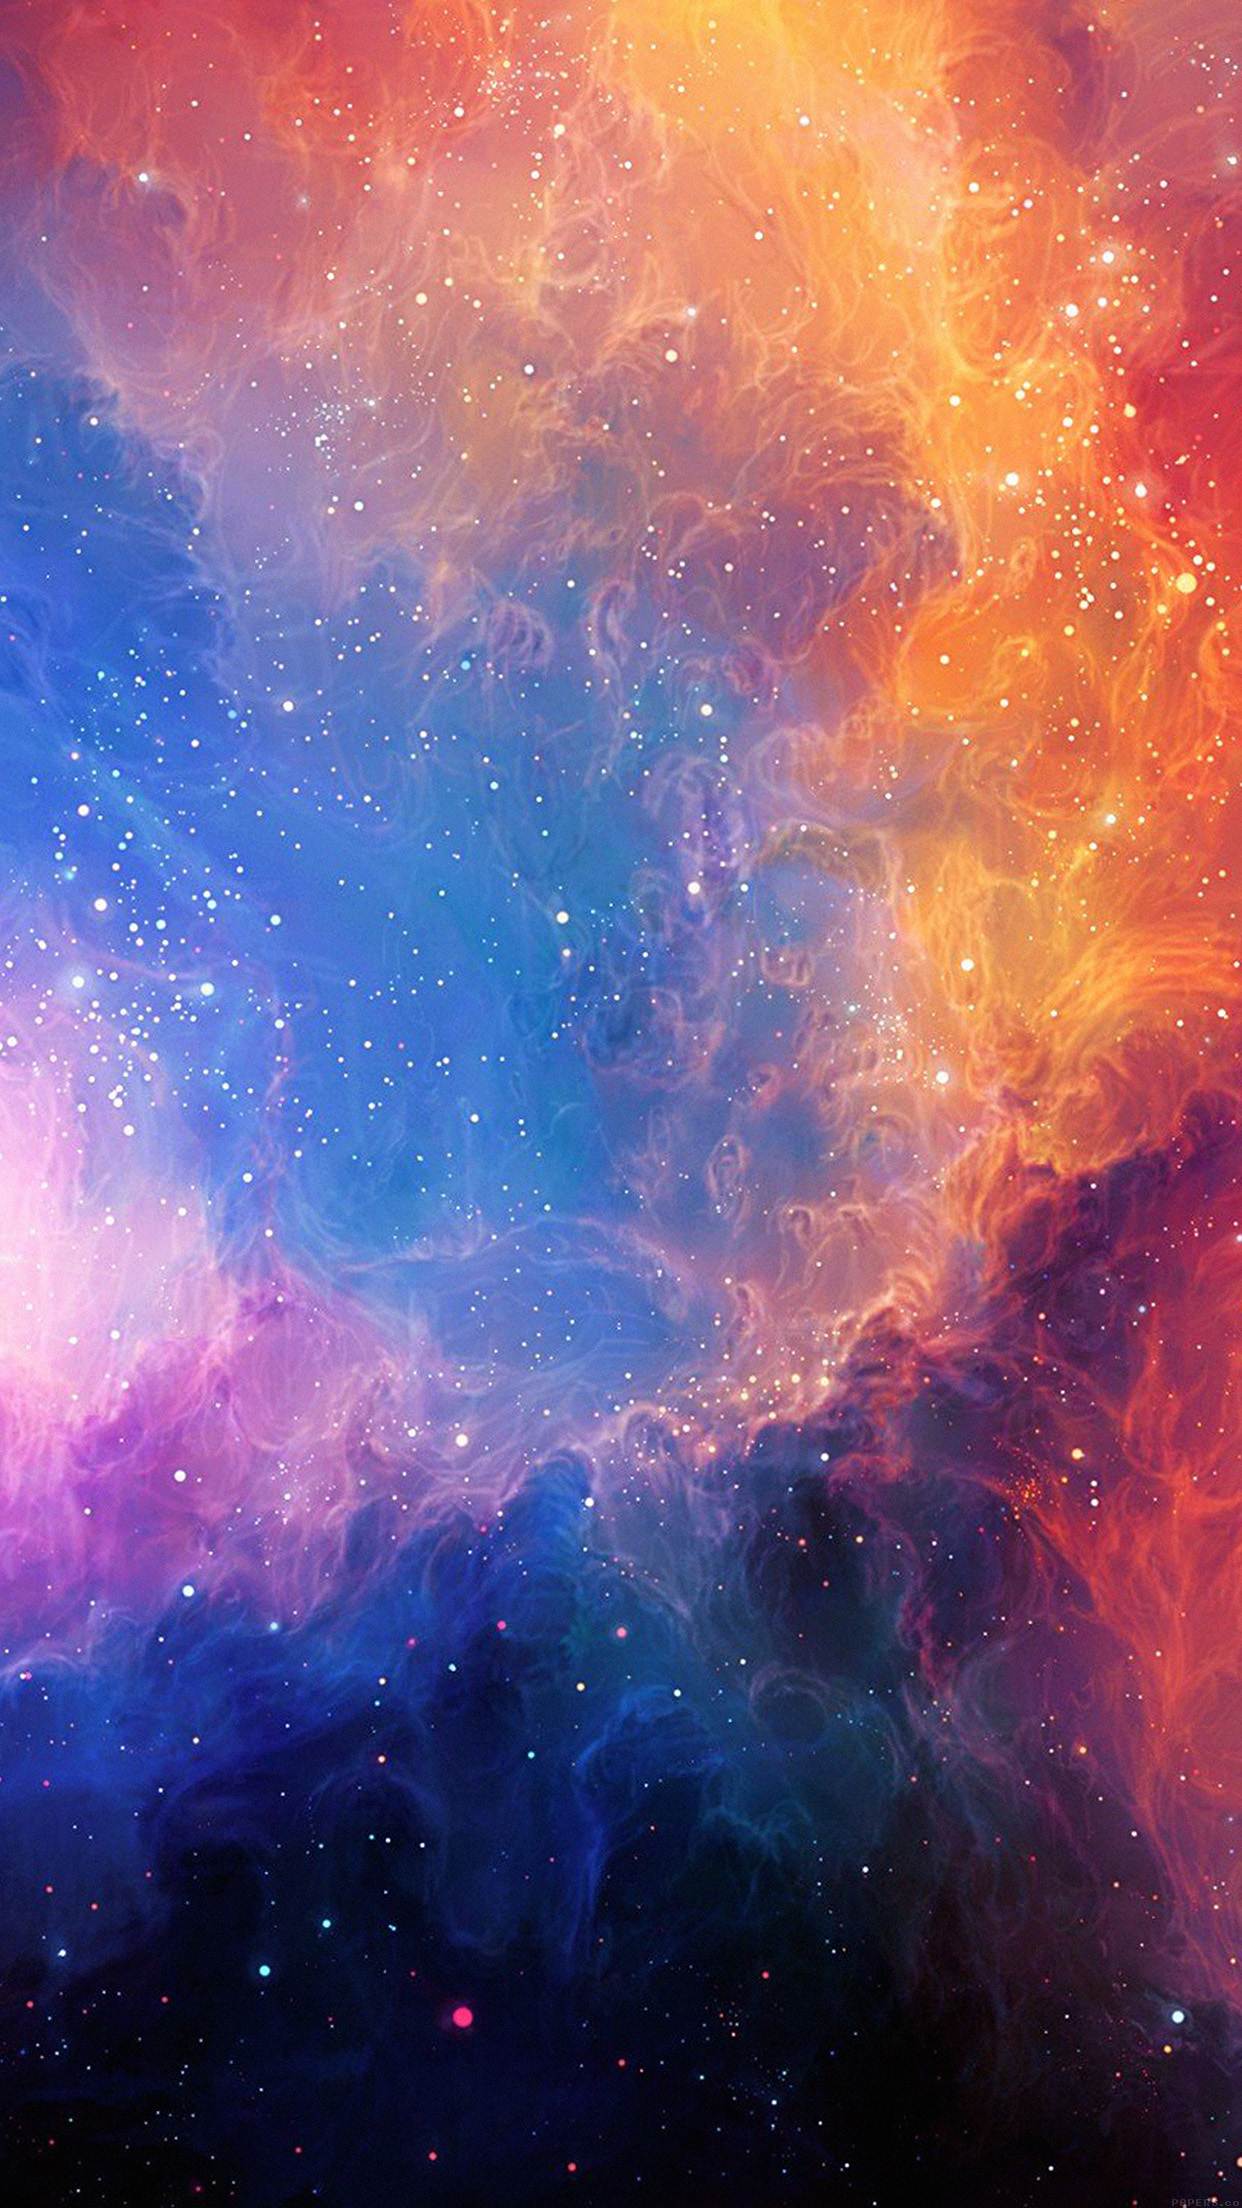 Space Iphone 5 Wallpapers